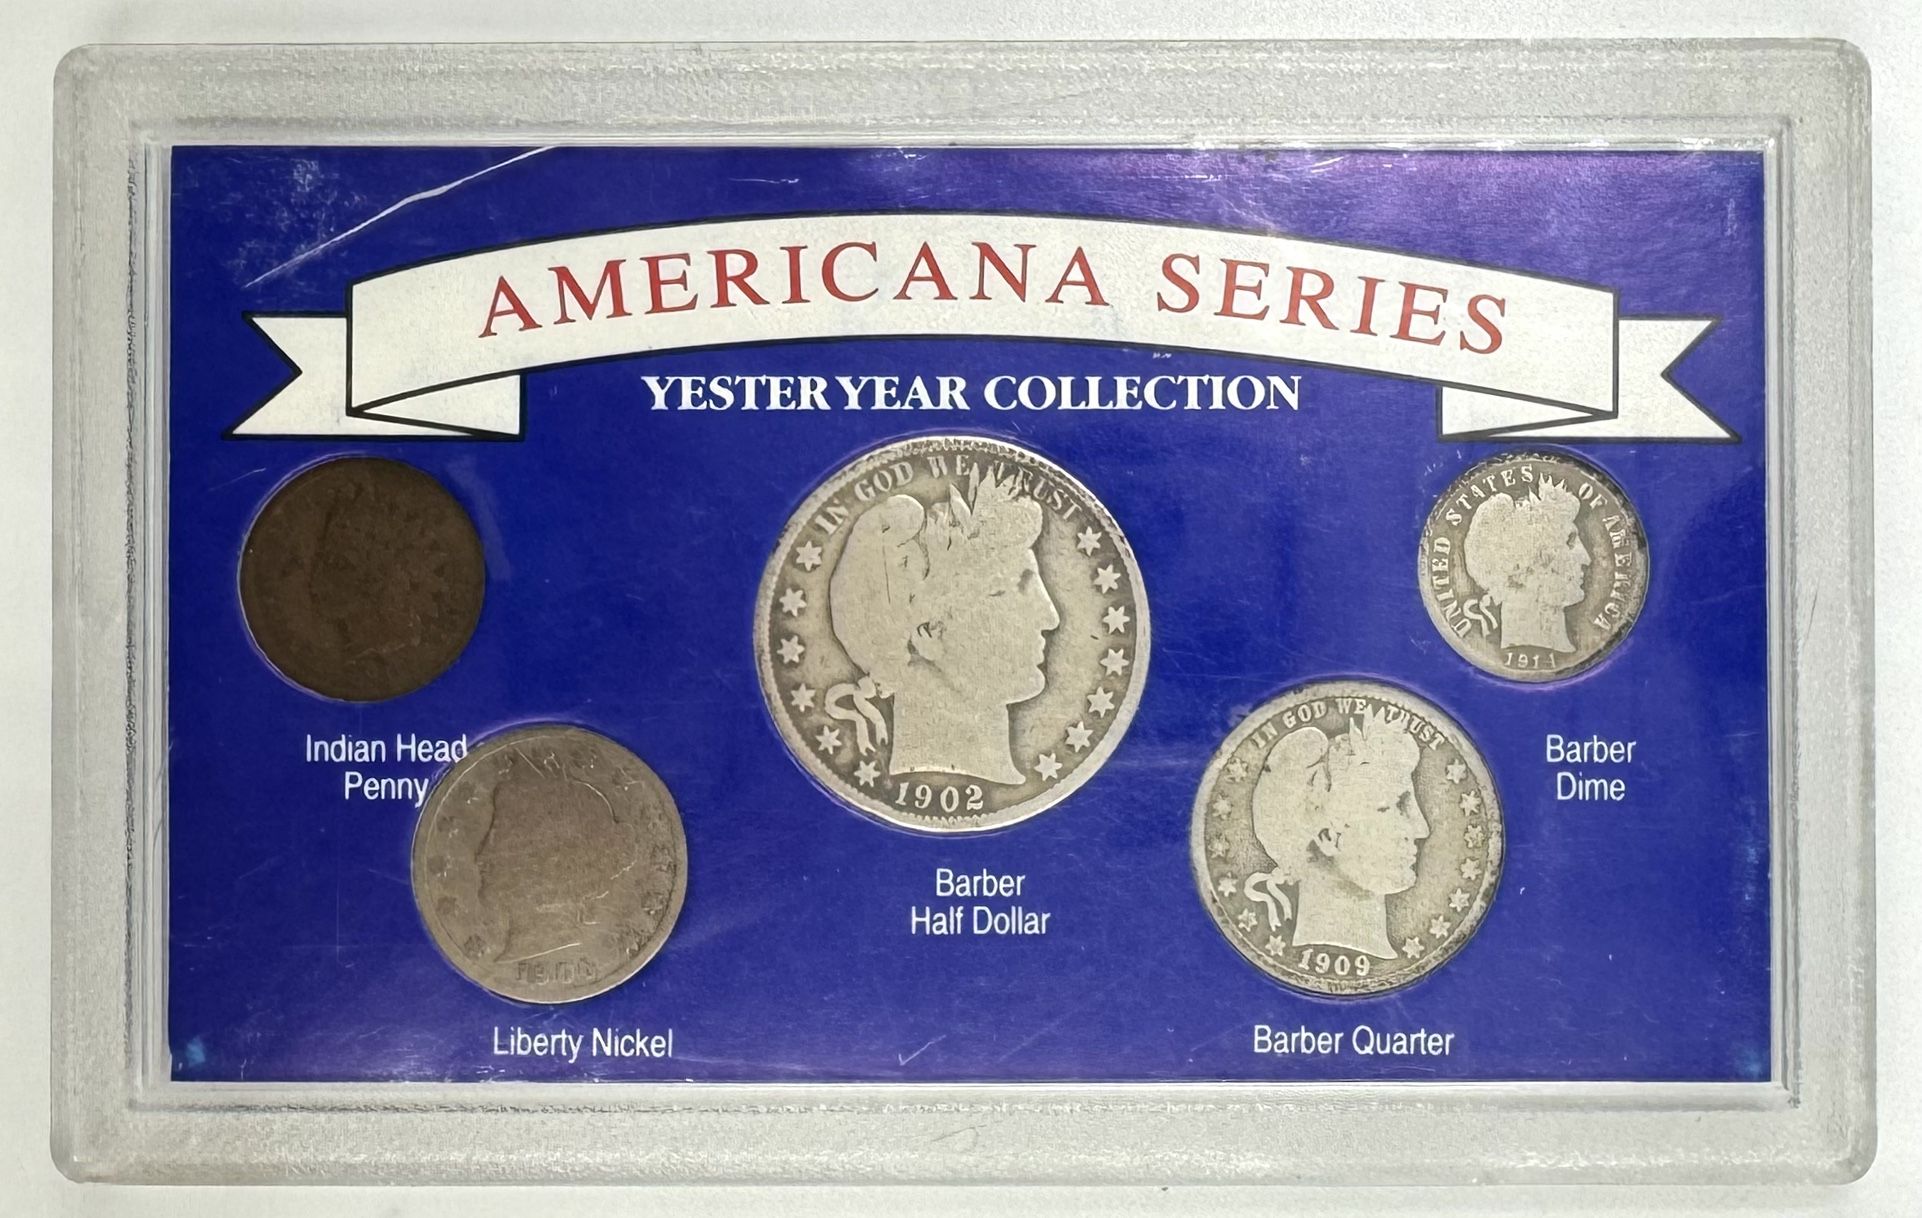 U.S 5 Coin Americana Series Yesteryear Collection With 3 Silver Barbers